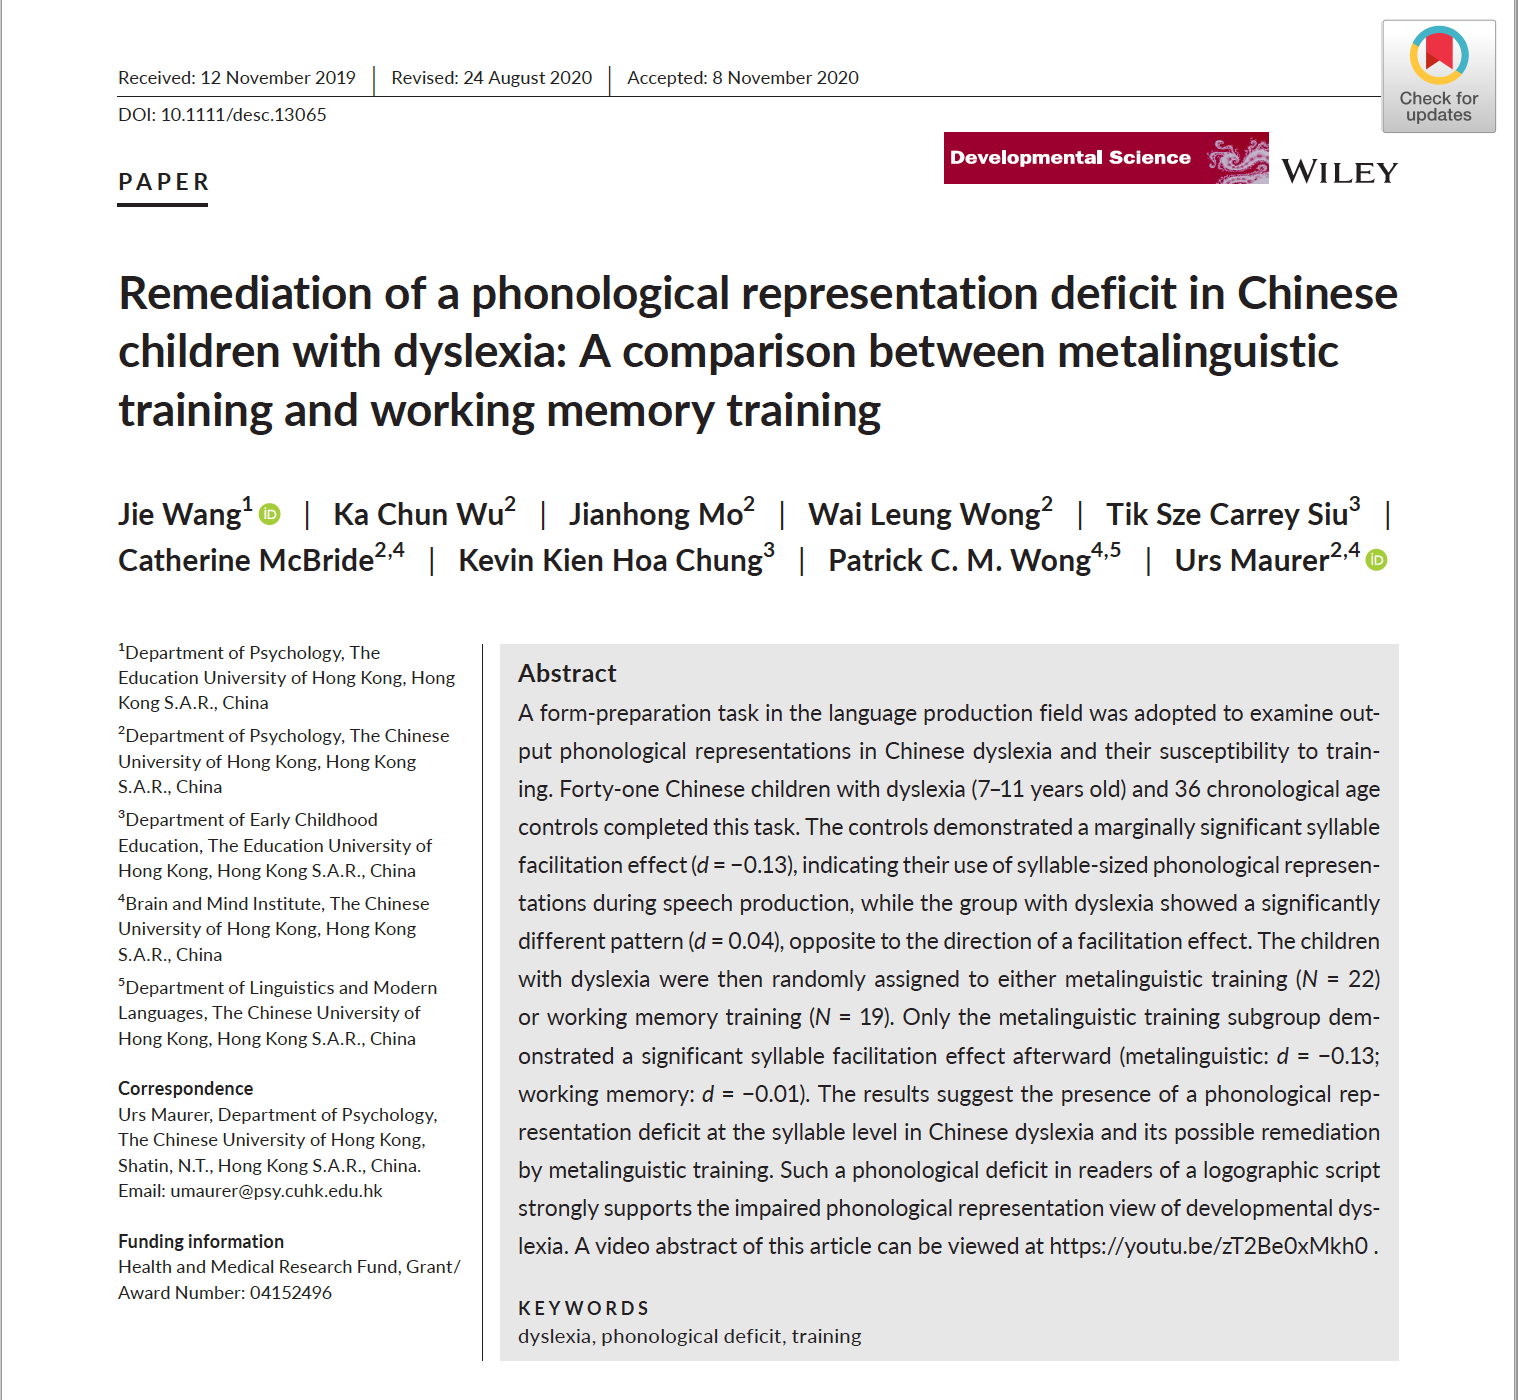 Phonological representations in Chinese dyslexia